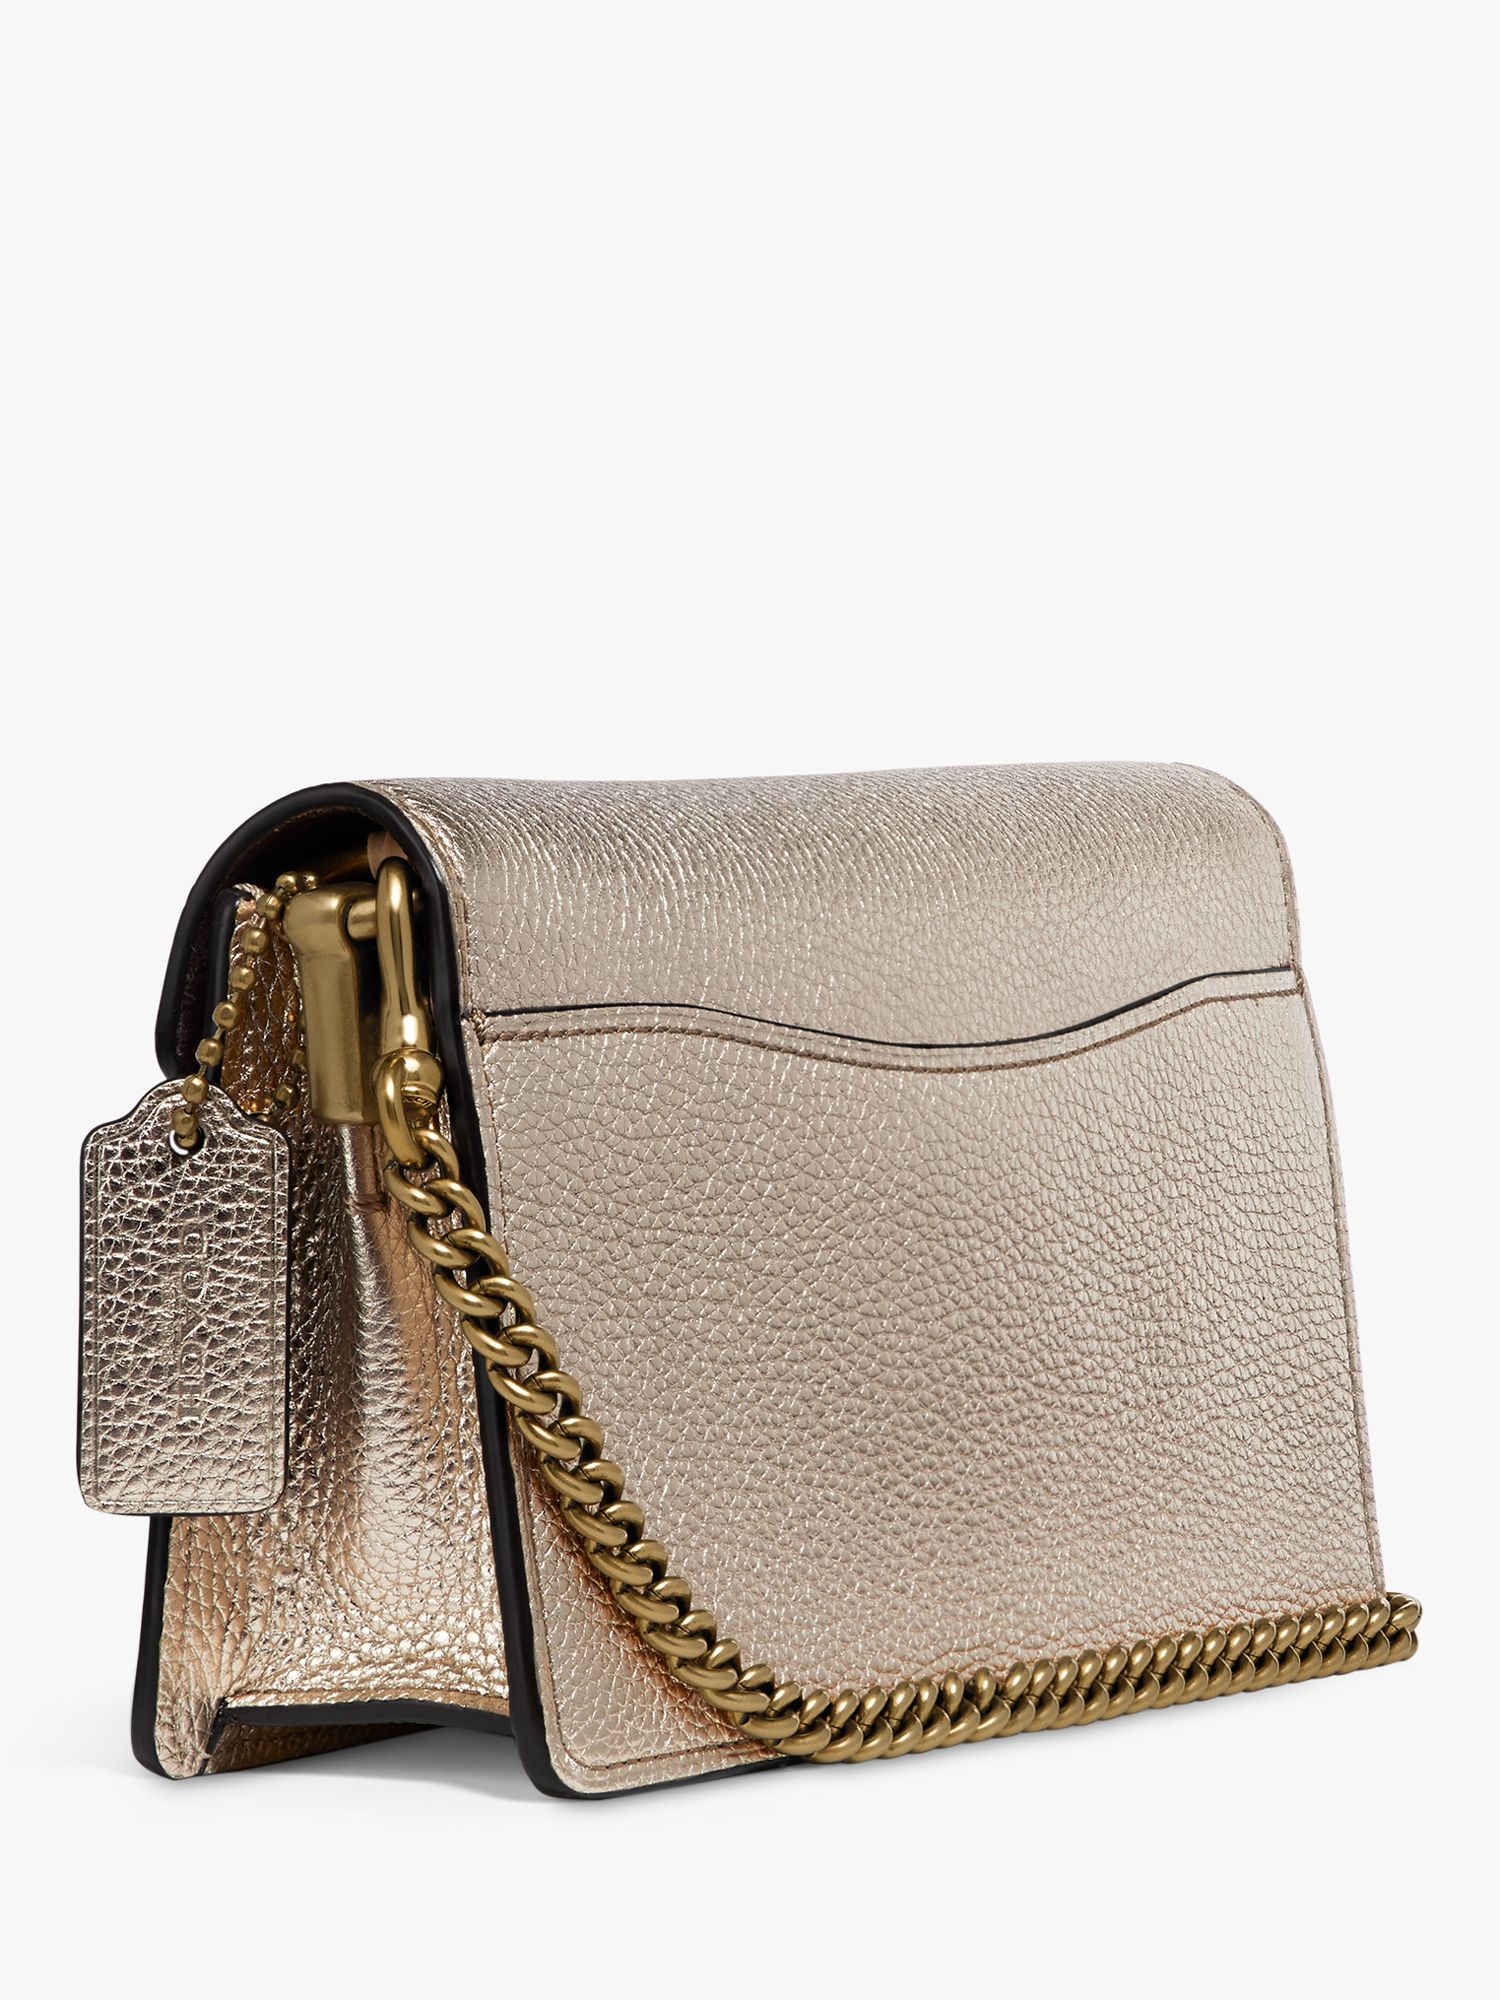 Coach Tabby Leather Chain Cross Body Bag at John Lewis & Partners